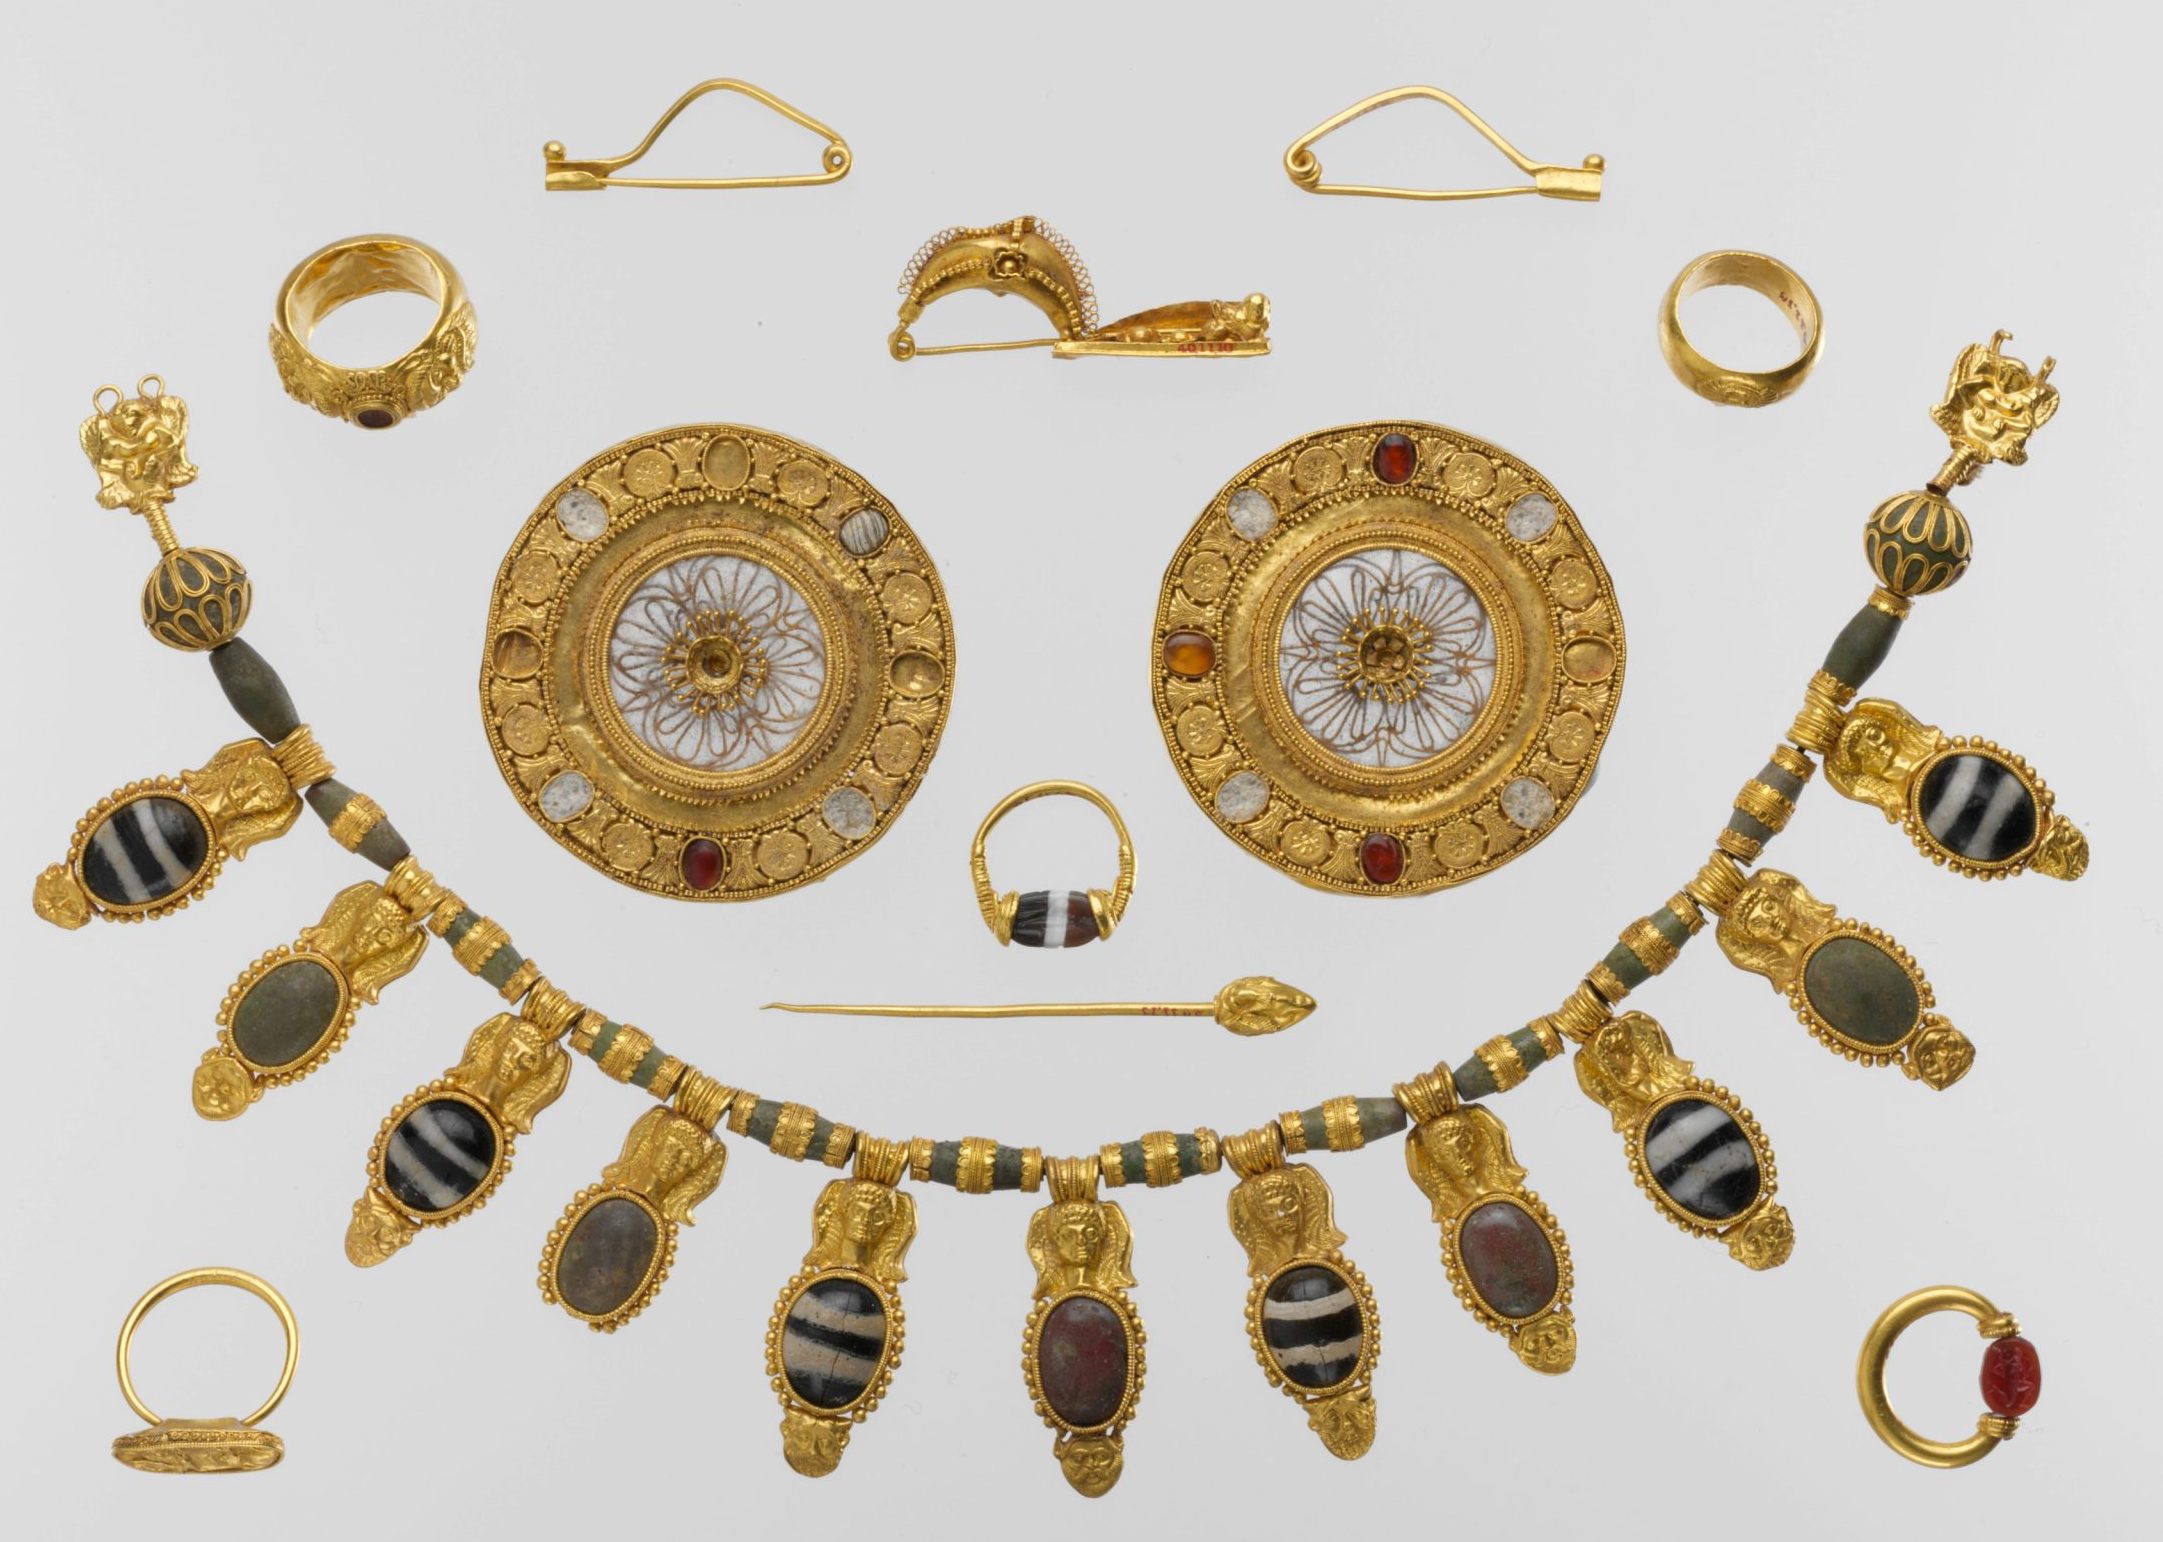 The Gold Jewelry of the Etruscans